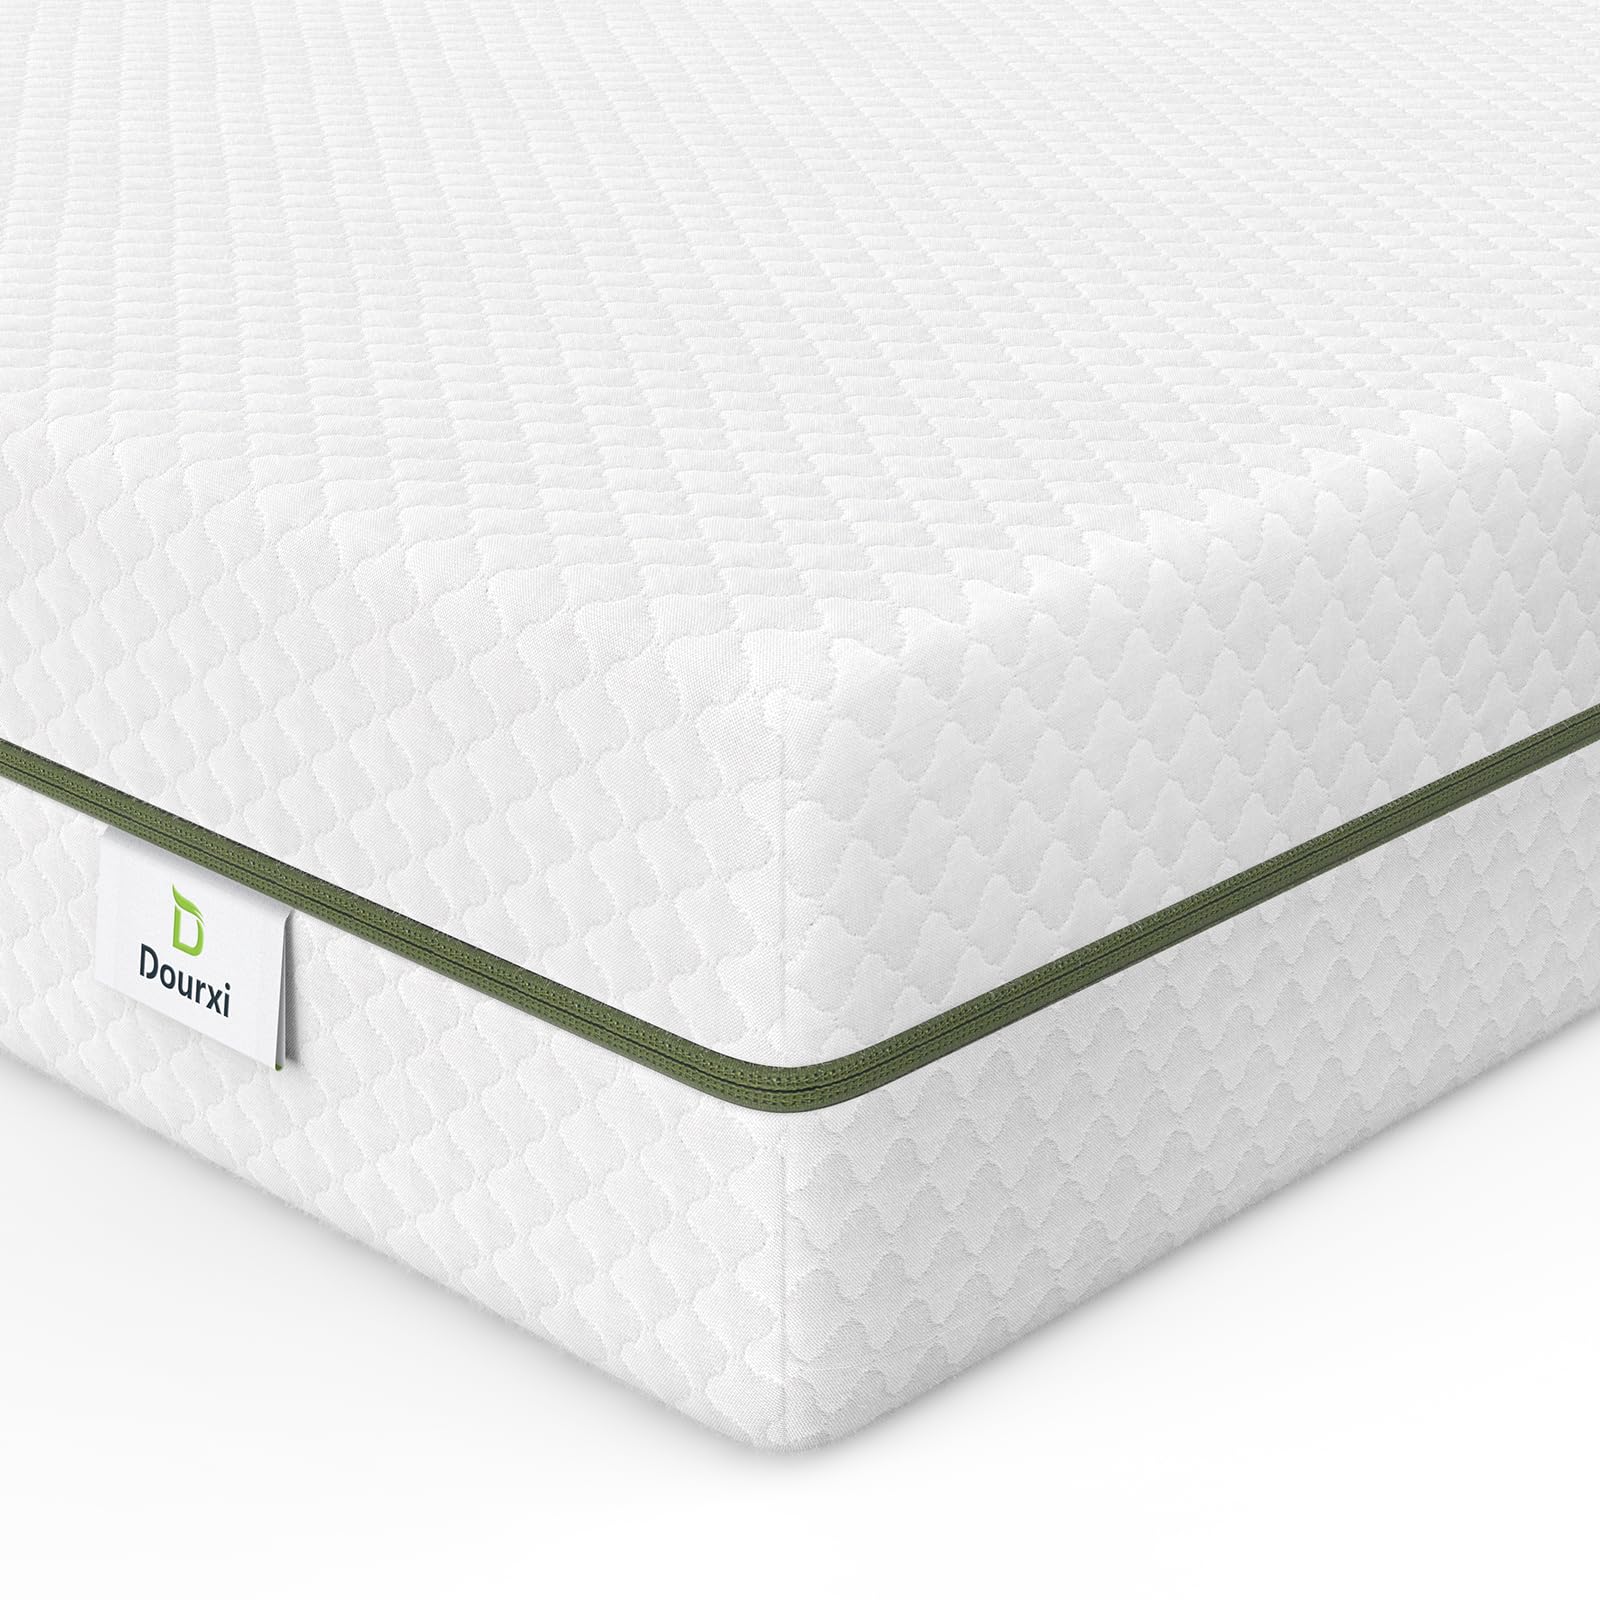 Dourxi Crib Mattress, Dual-Sided Comfort Baby and Toddler Mattress with Cool Gel Memory Foam and Removable Cover, Fits Standard Size Cribs and Toddler Bed, 52x27.5x5.5 inches